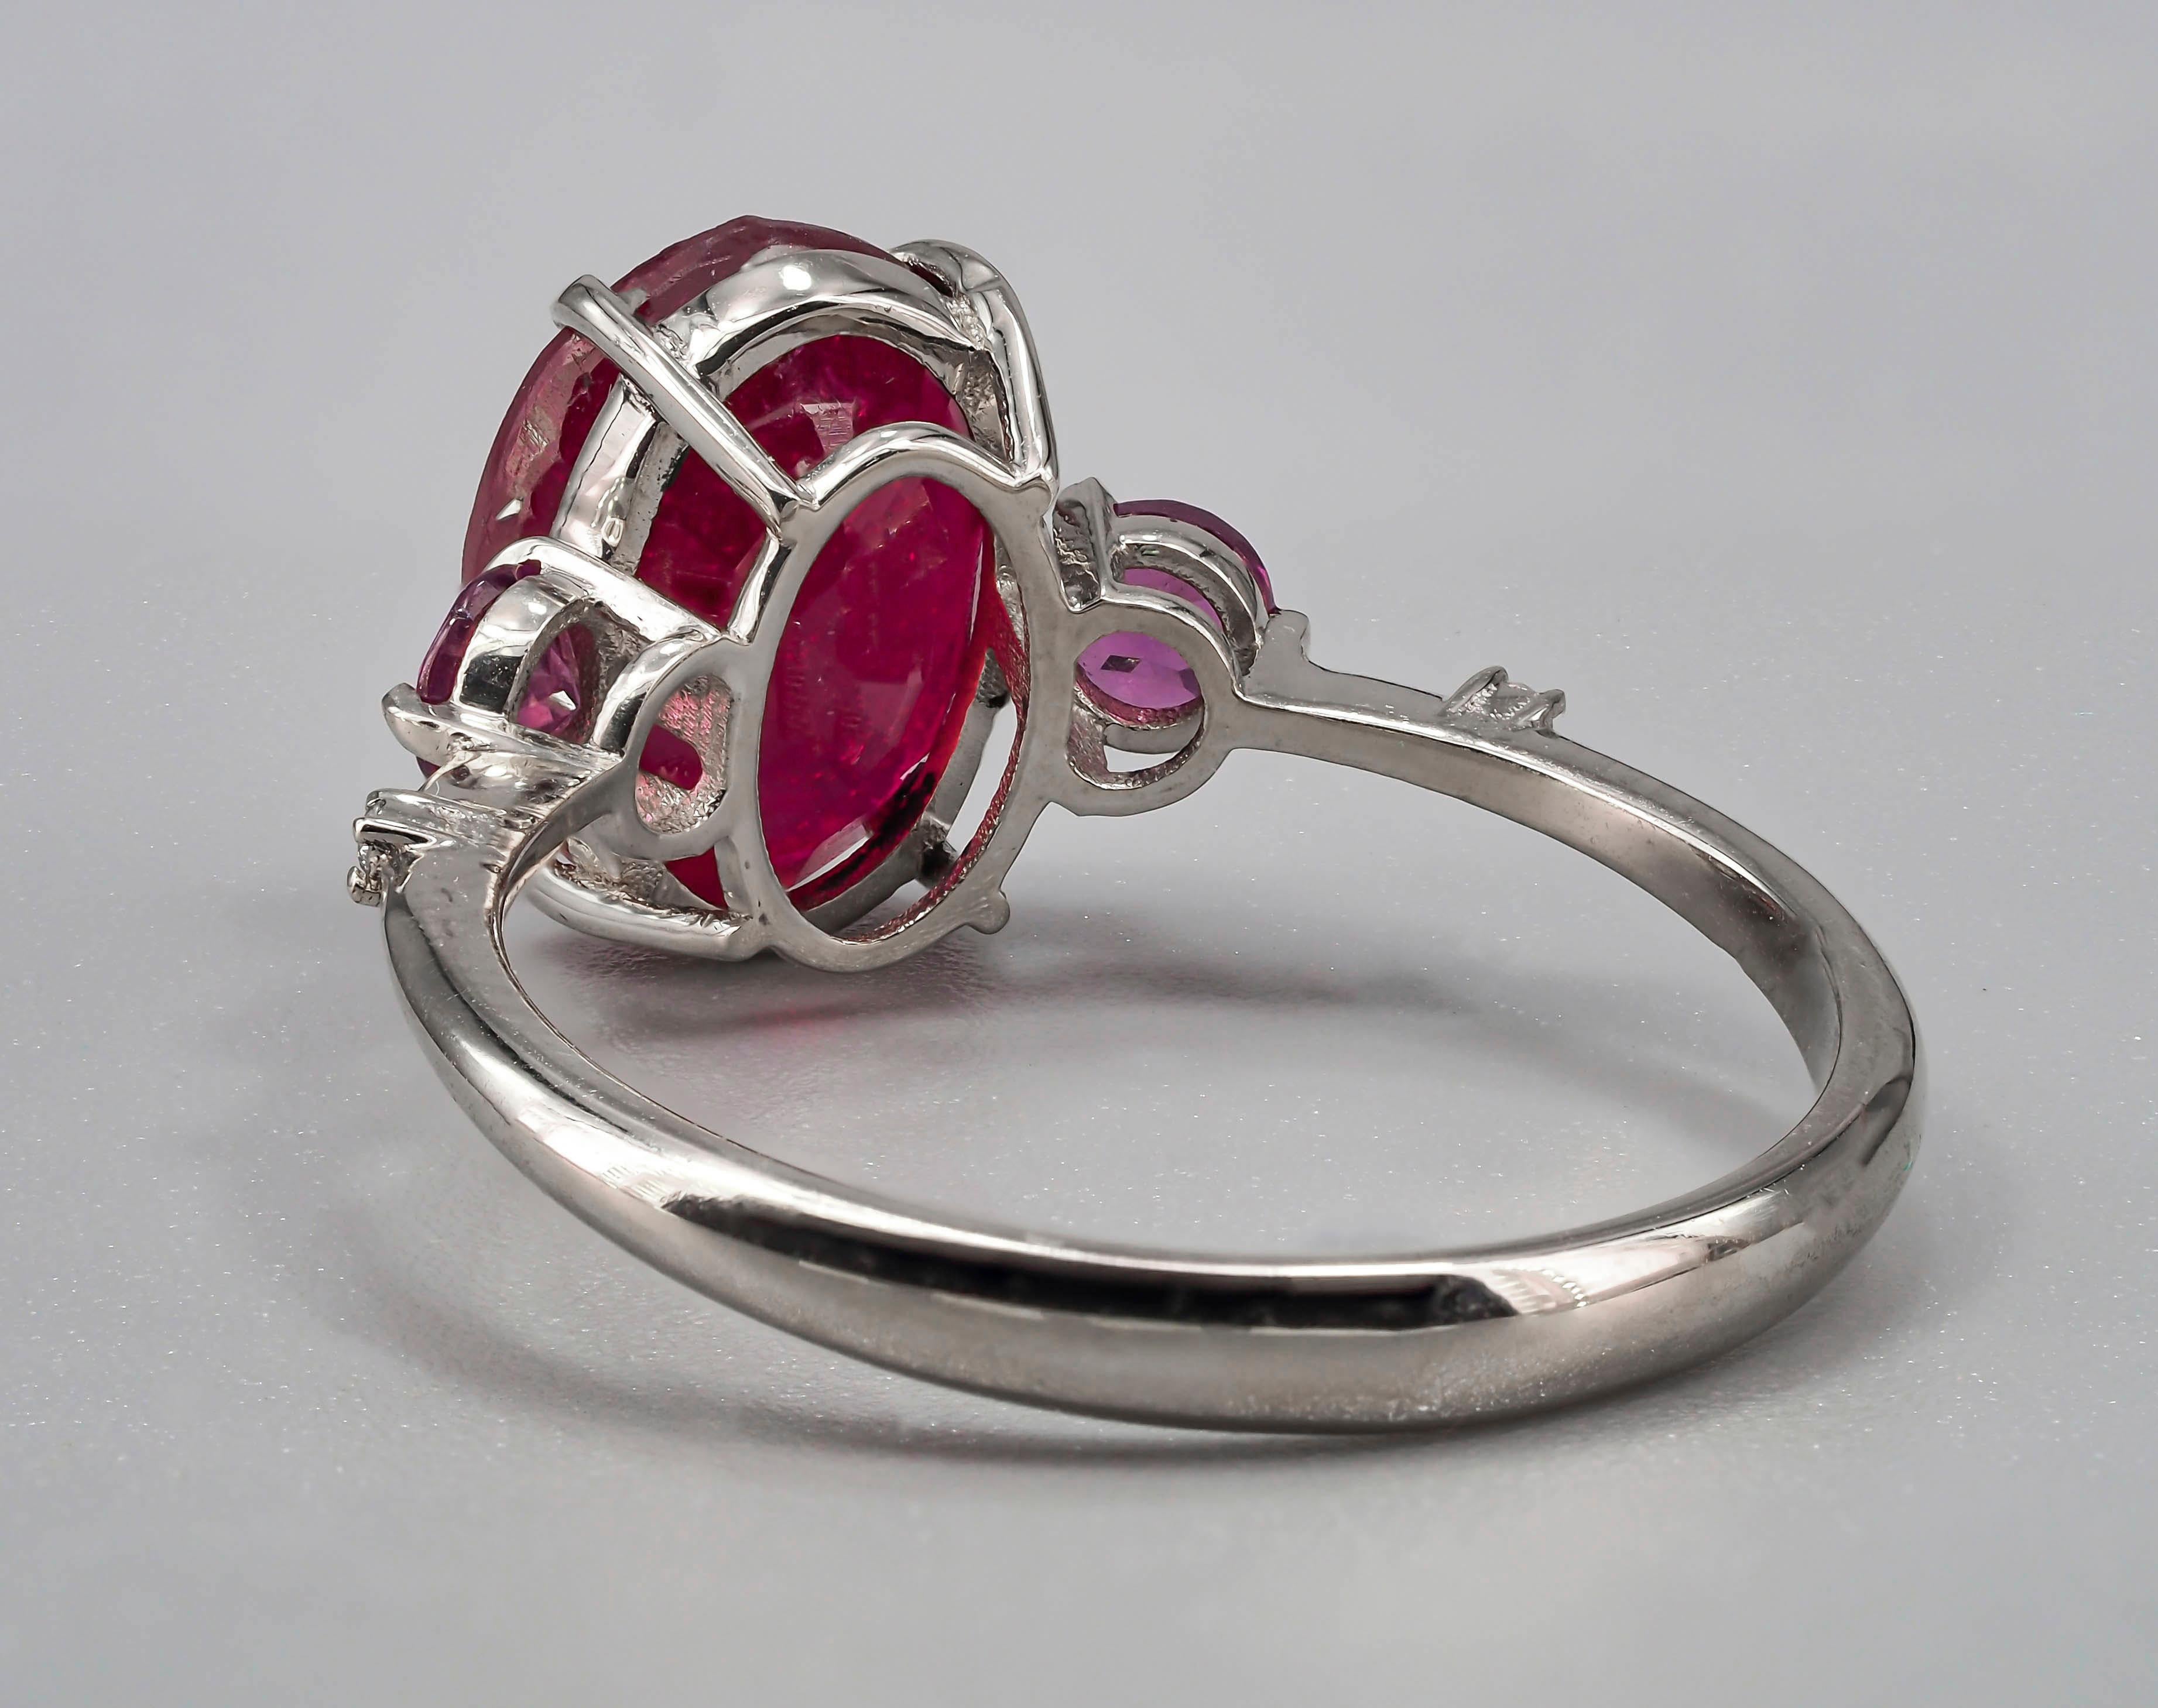 For Sale:  Ruby ring in 14k gold. Oval ruby ring. Solitaire ring with ruby.  8